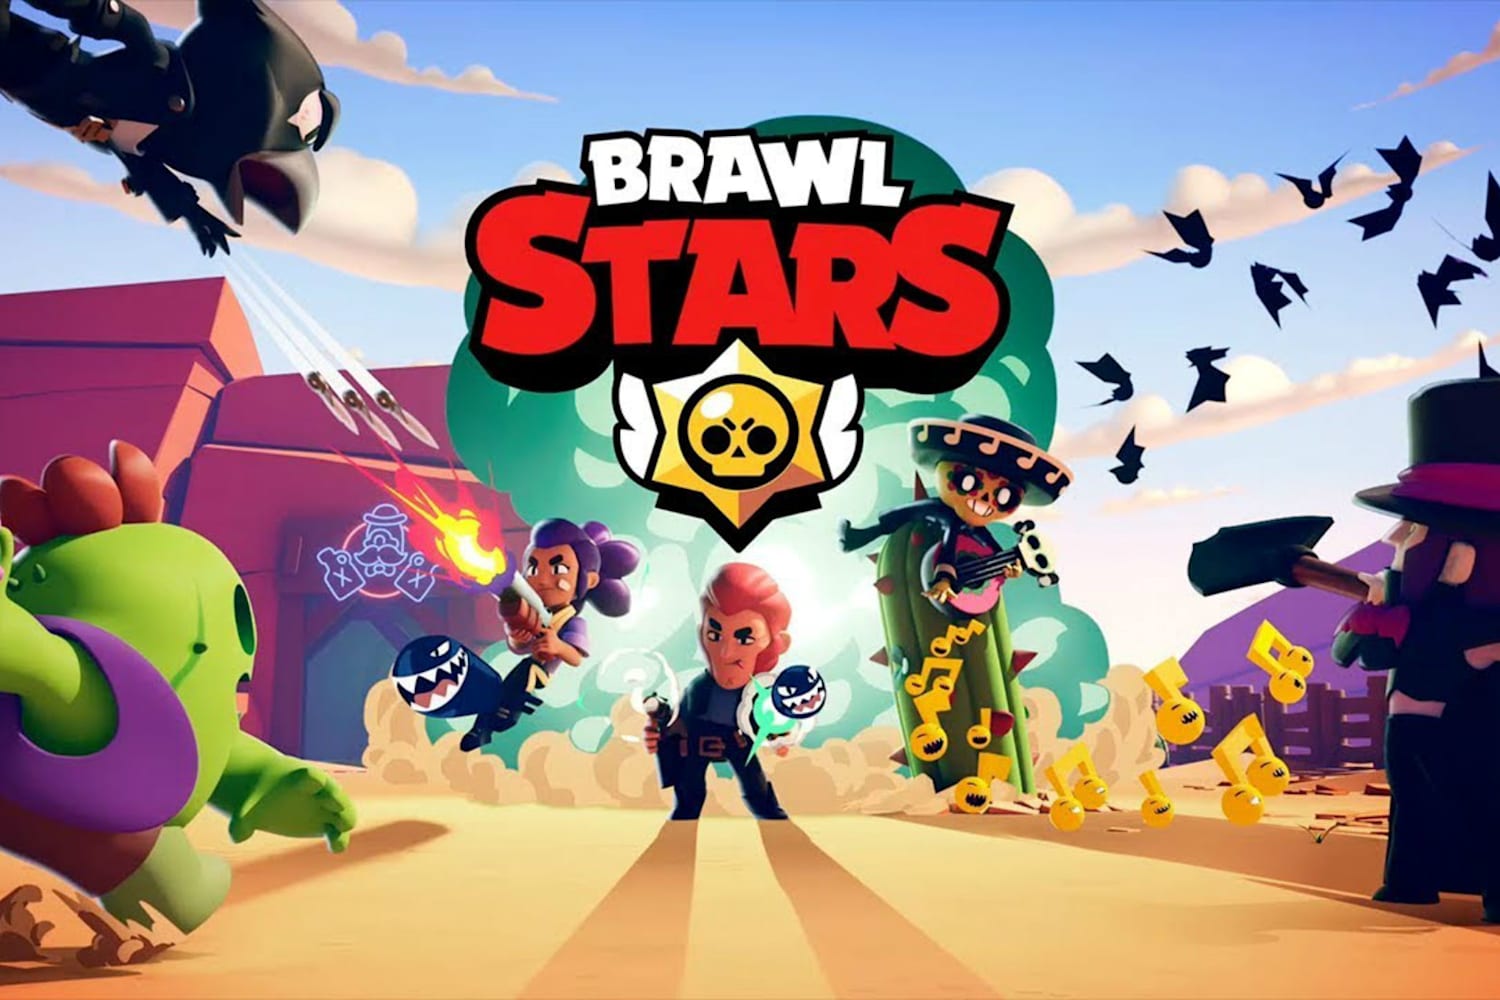 How To Play Brawl Stars 2020 Playing Guide - brawl stars apps no go